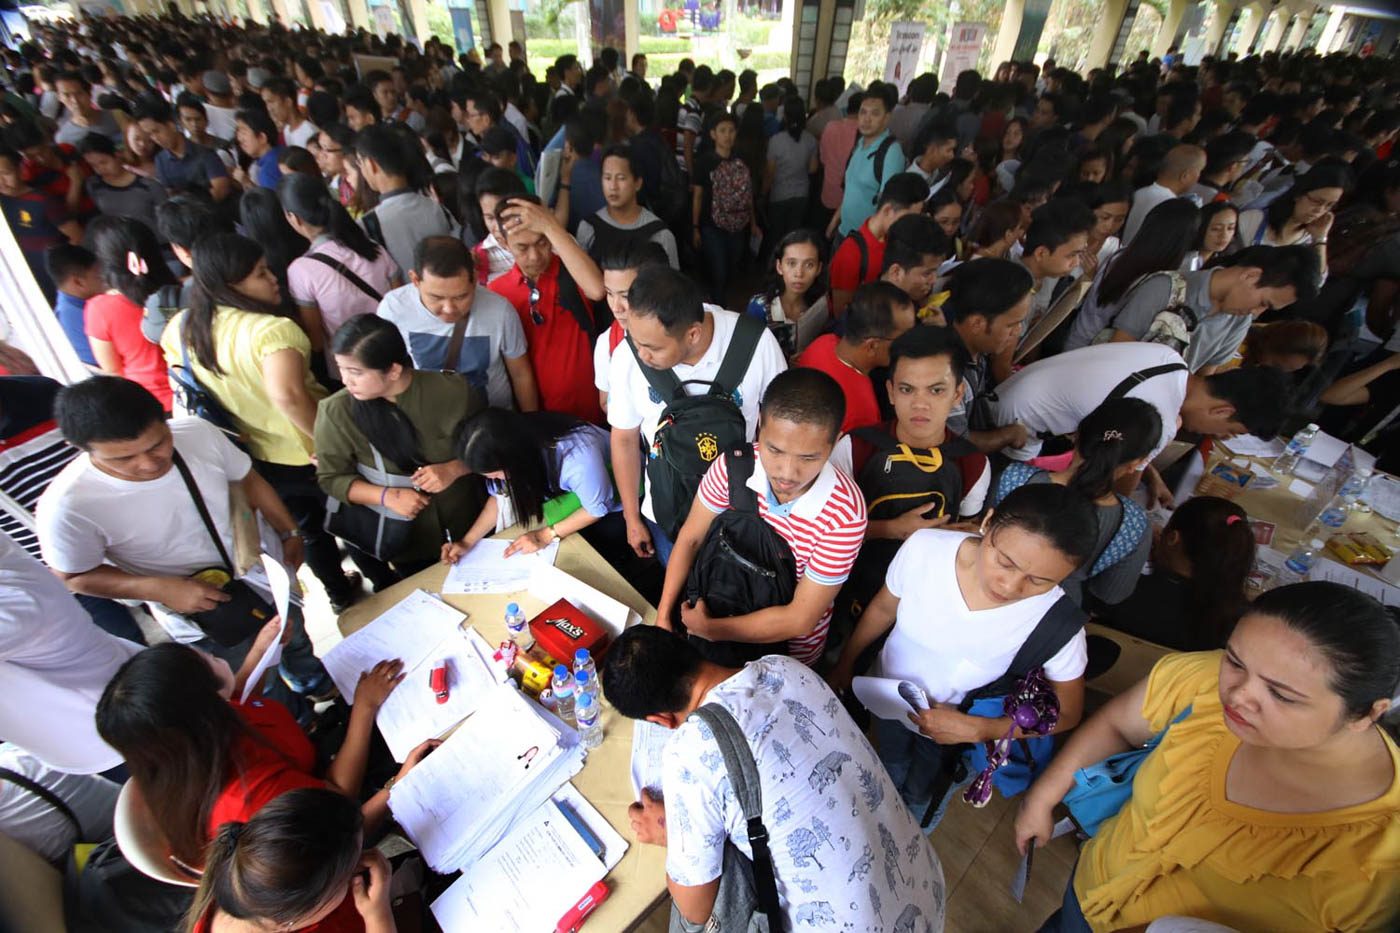 Employers’ group to comply with Duterte EO despite ‘reservations’